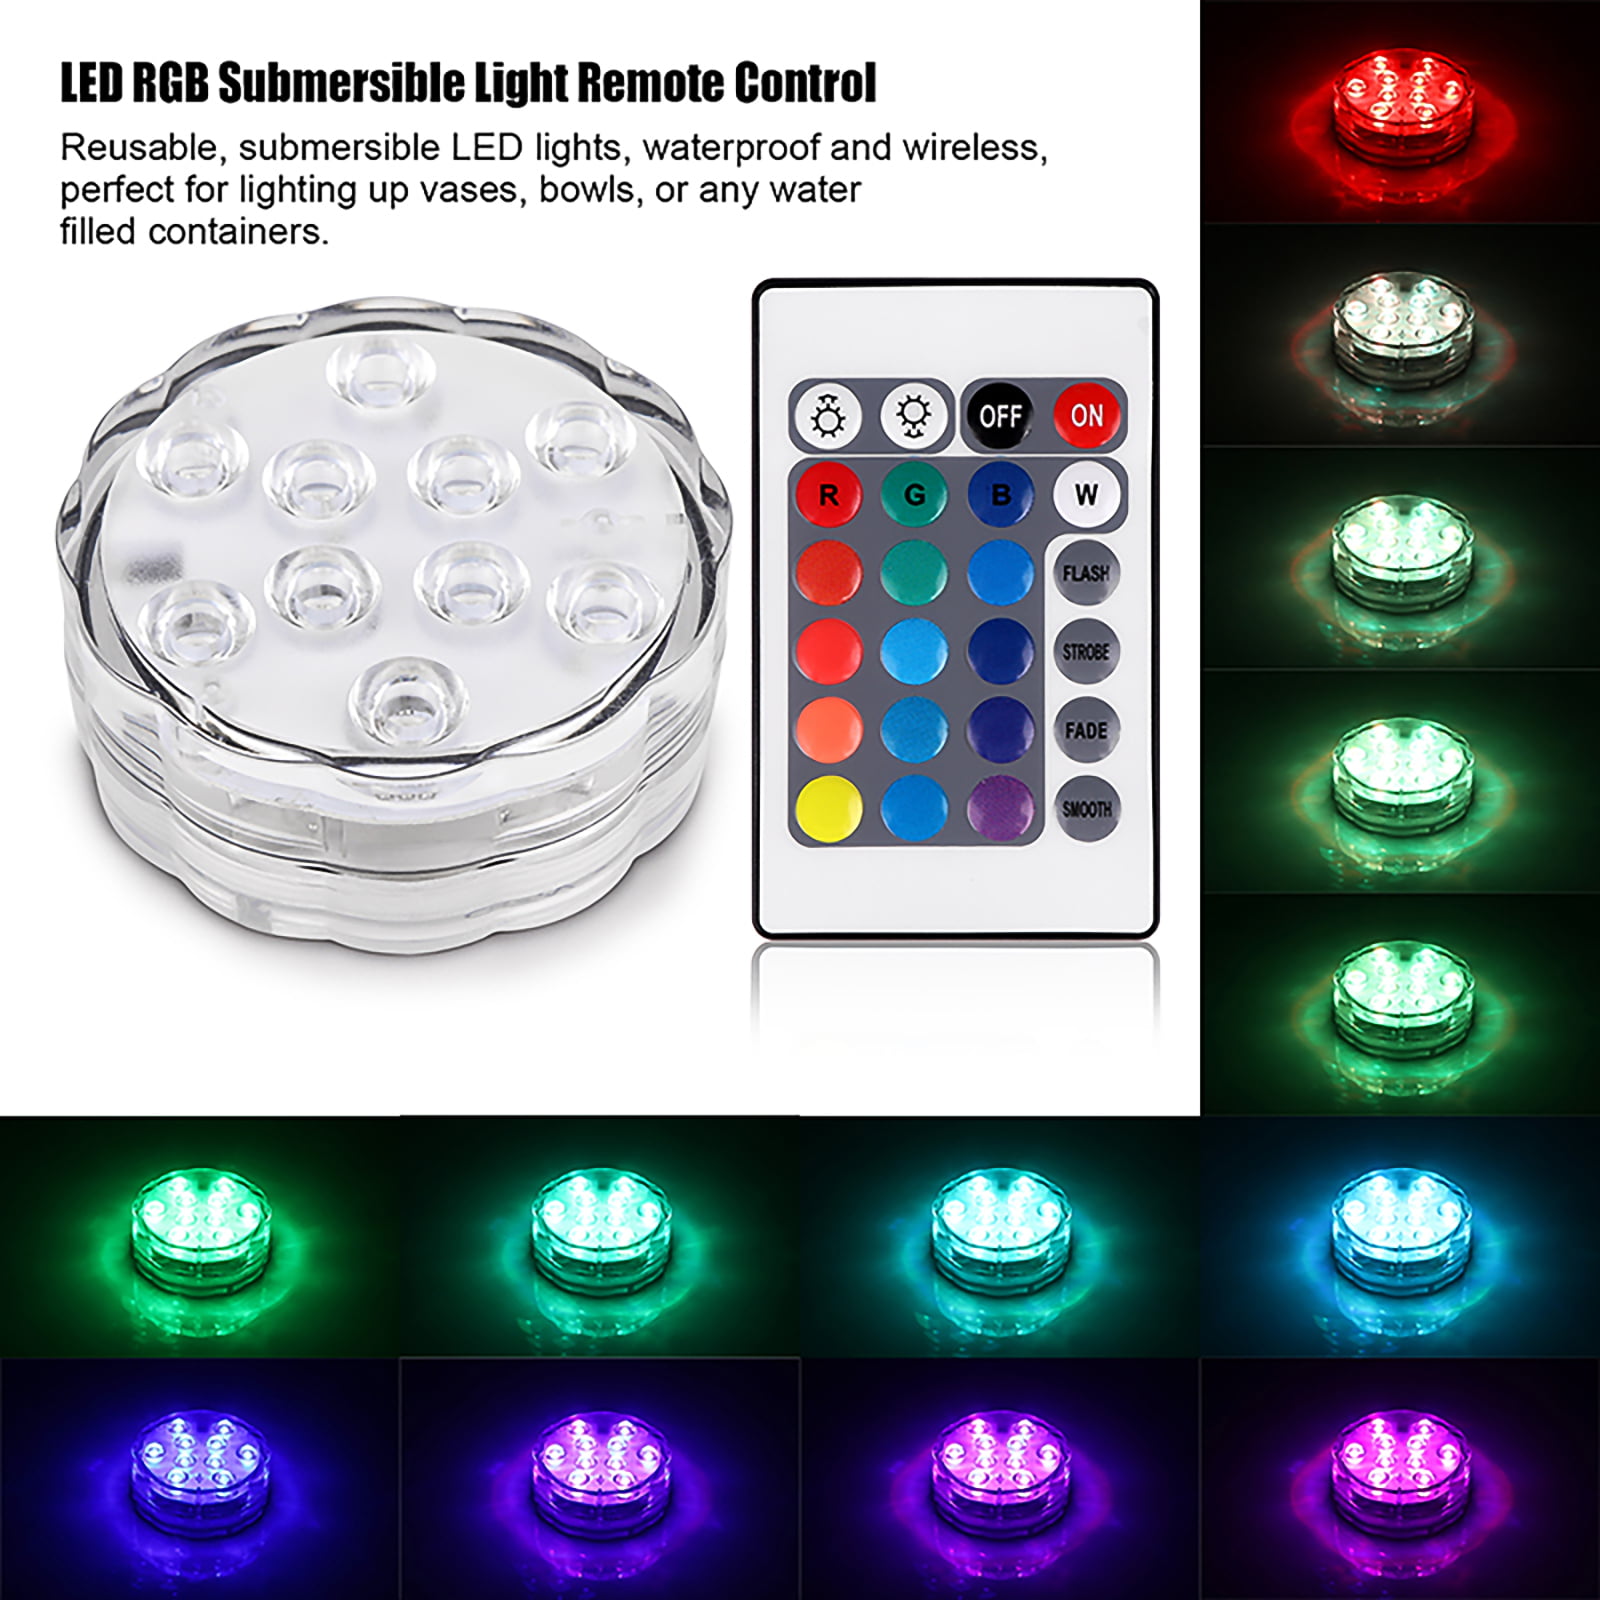 Waterproof 10 LED RGB Submersible Light Party Vase Lamp With Remote Control 